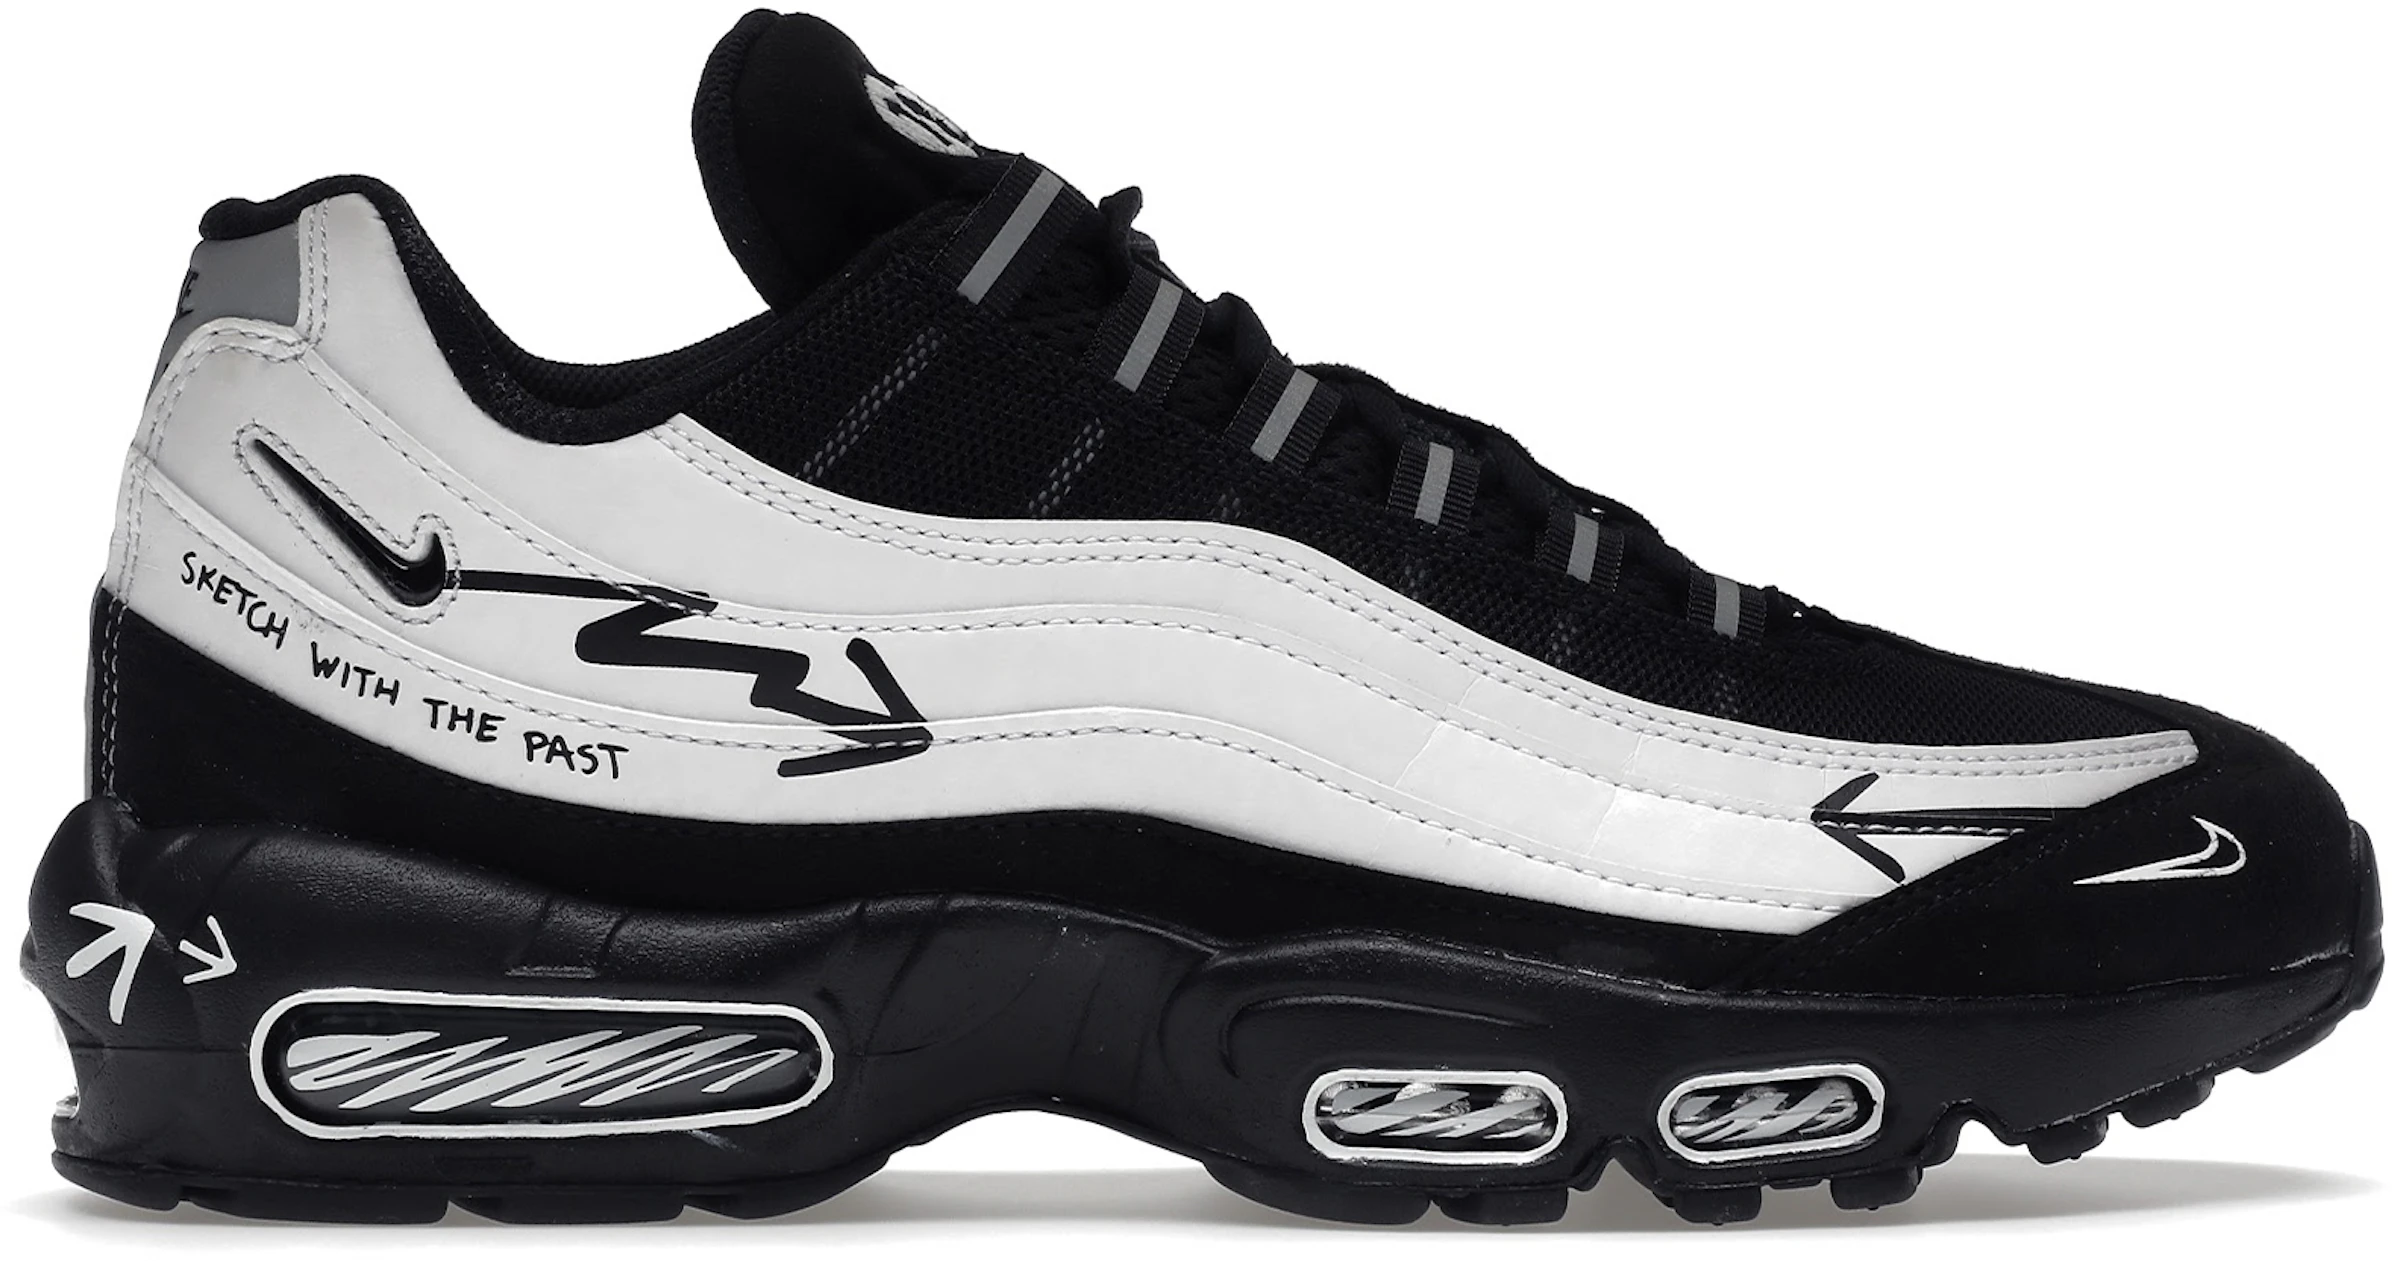 Air Max 95 SP Future Movement Sketch With The Past - US